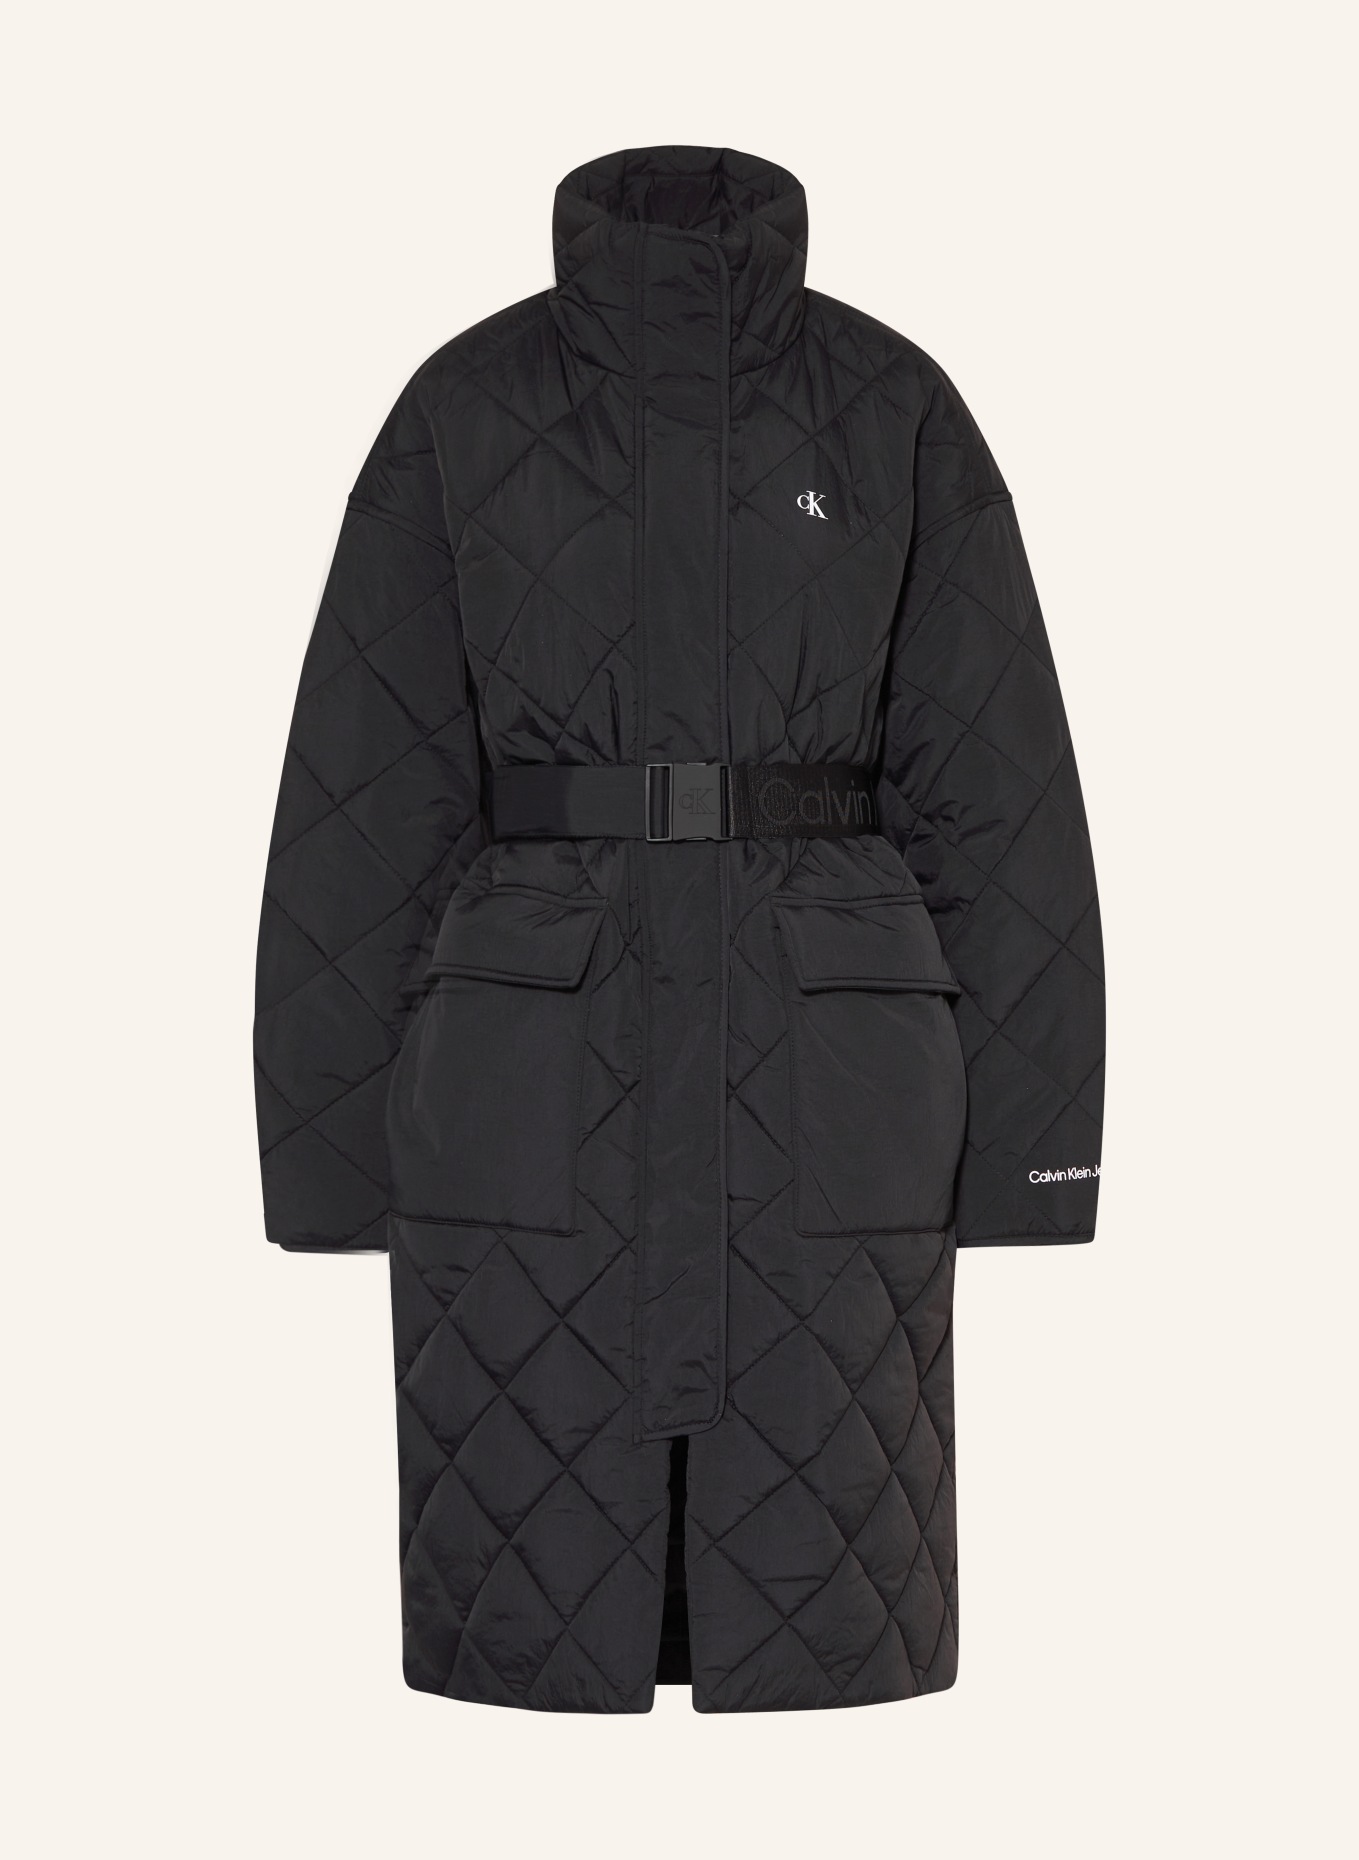 Quilted Klein Jeans in black Calvin coat